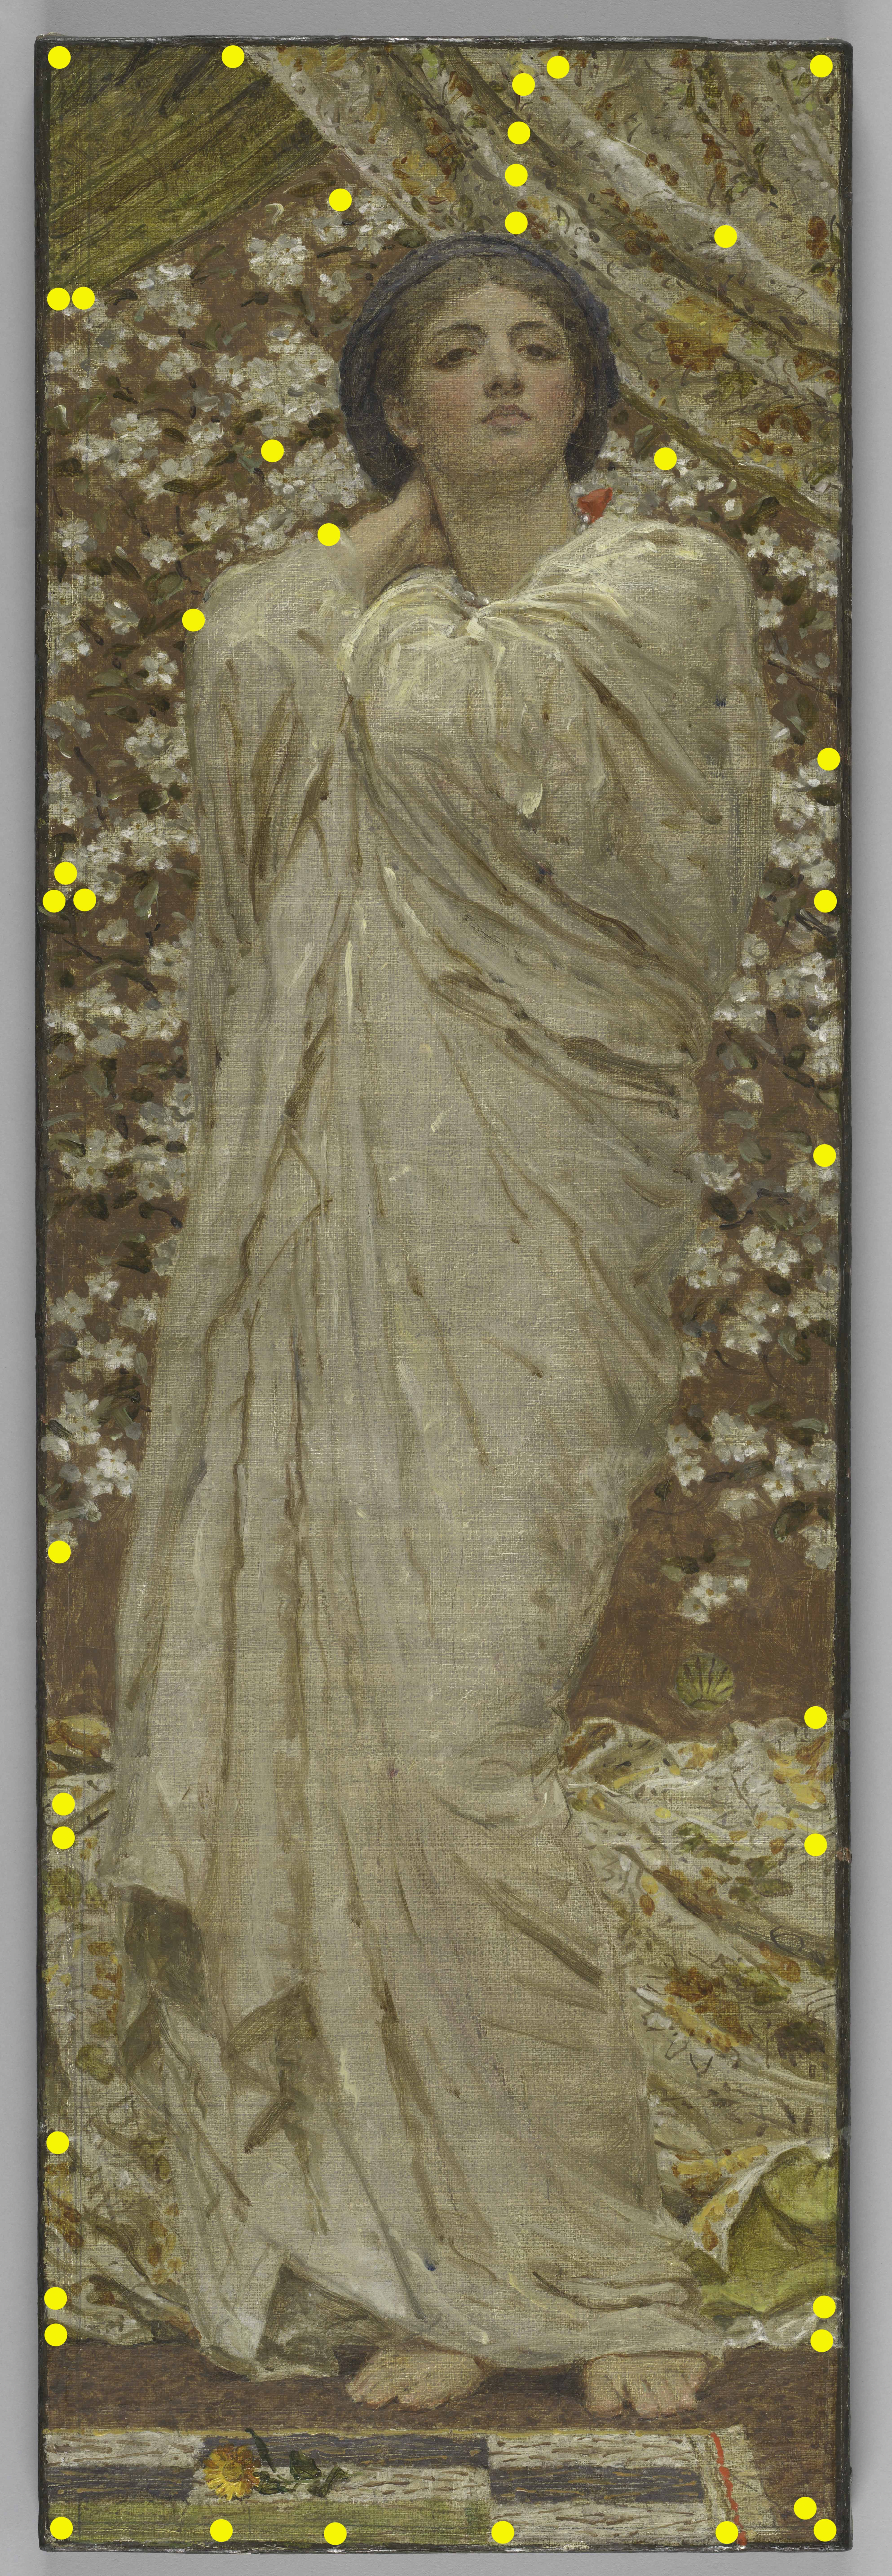 A key depicting the locations of pin holes on the painting Study for “Blossoms” with yellow dots.